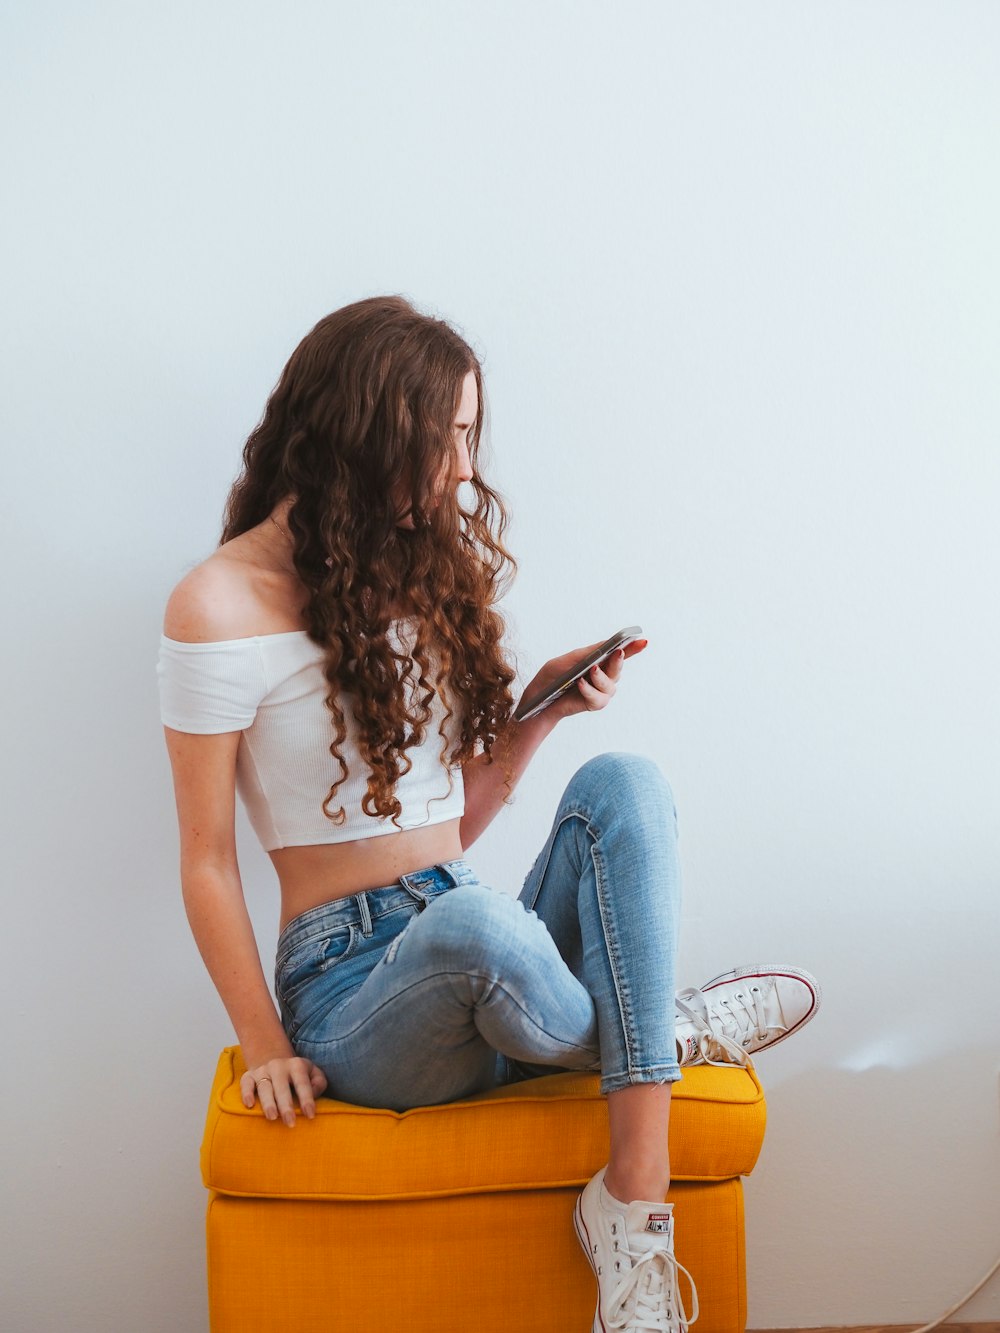 woman in white shirt and blue denim jeans sitting on yellow chair photo –  Free London Image on Unsplash